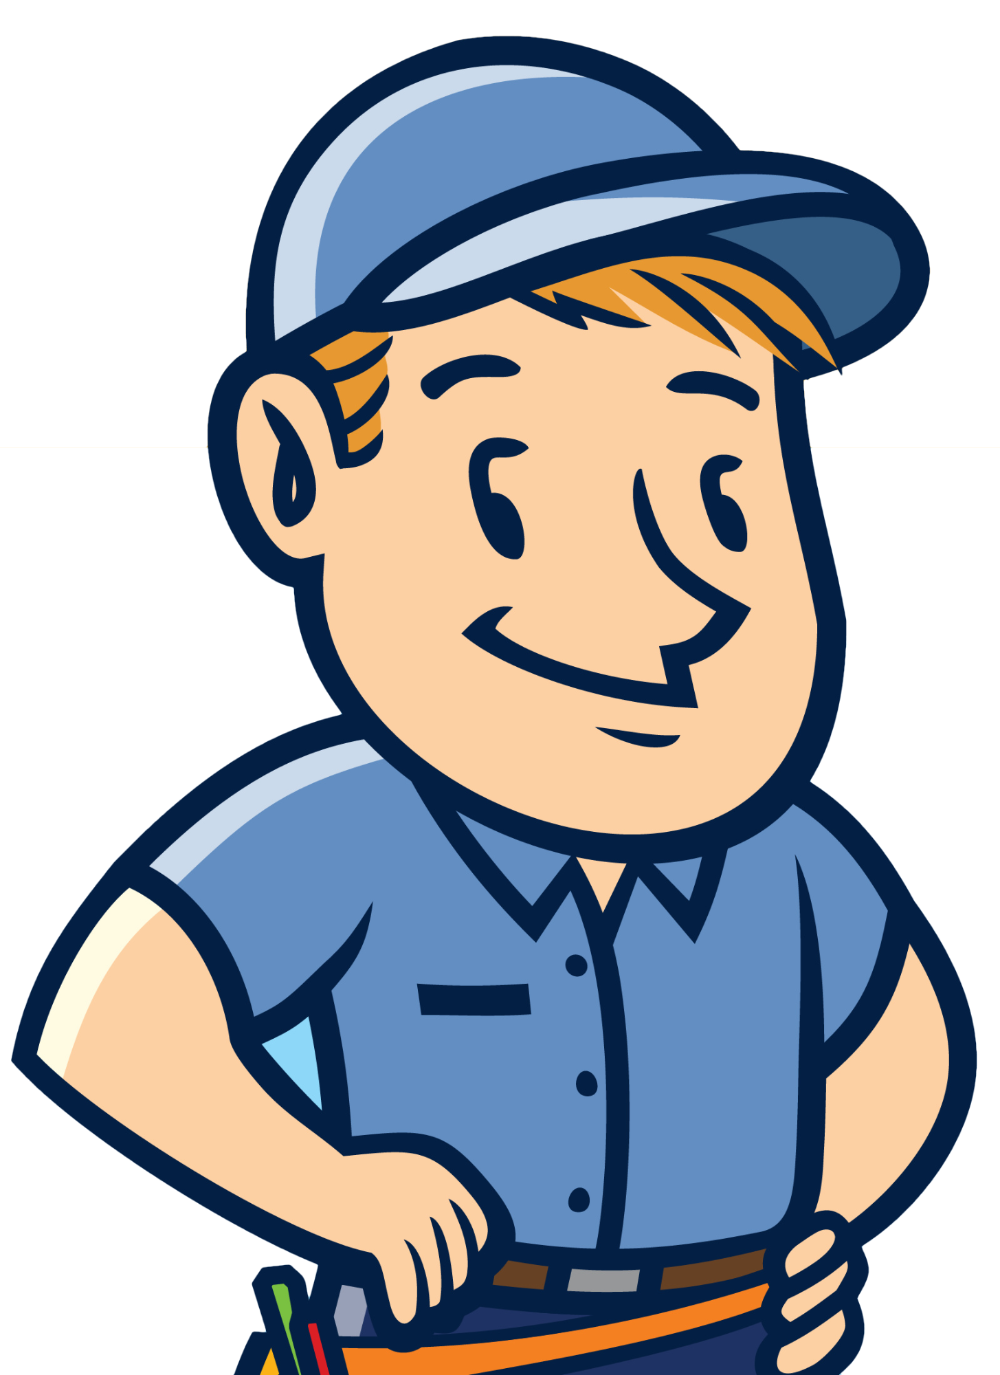 Illustration of a worker with blue hat and blue shirt